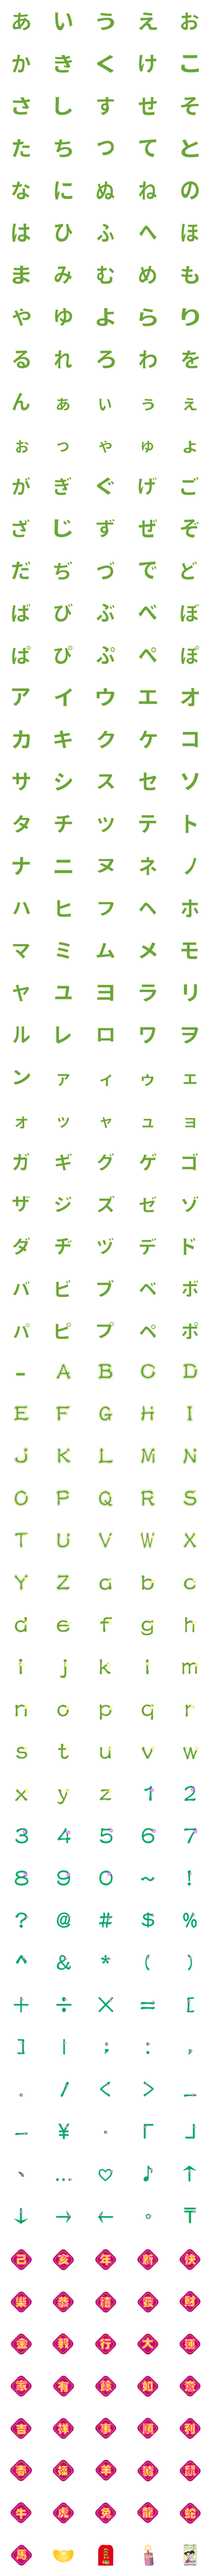 [LINE絵文字]New Year, English, Japanese Stickersの画像一覧